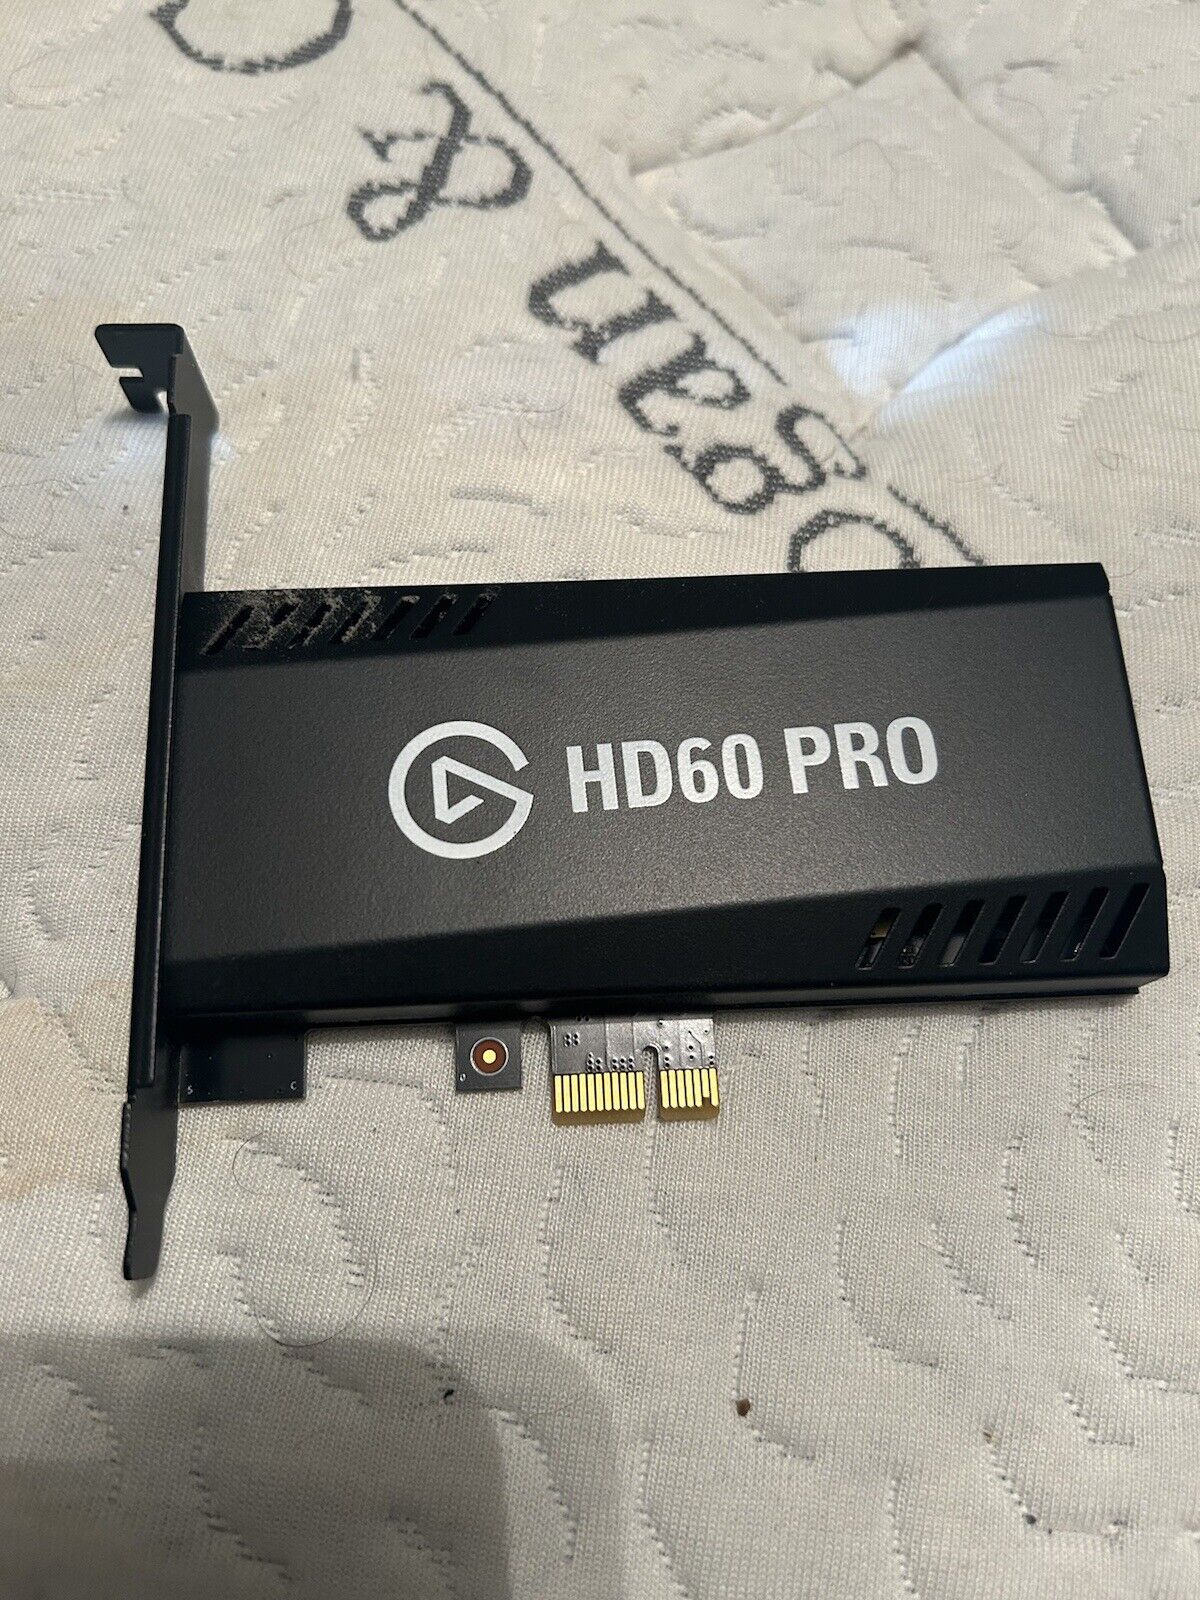 Elgato HD60 Pro Internal PCIe HDMI Video Game Capture Card Tested.